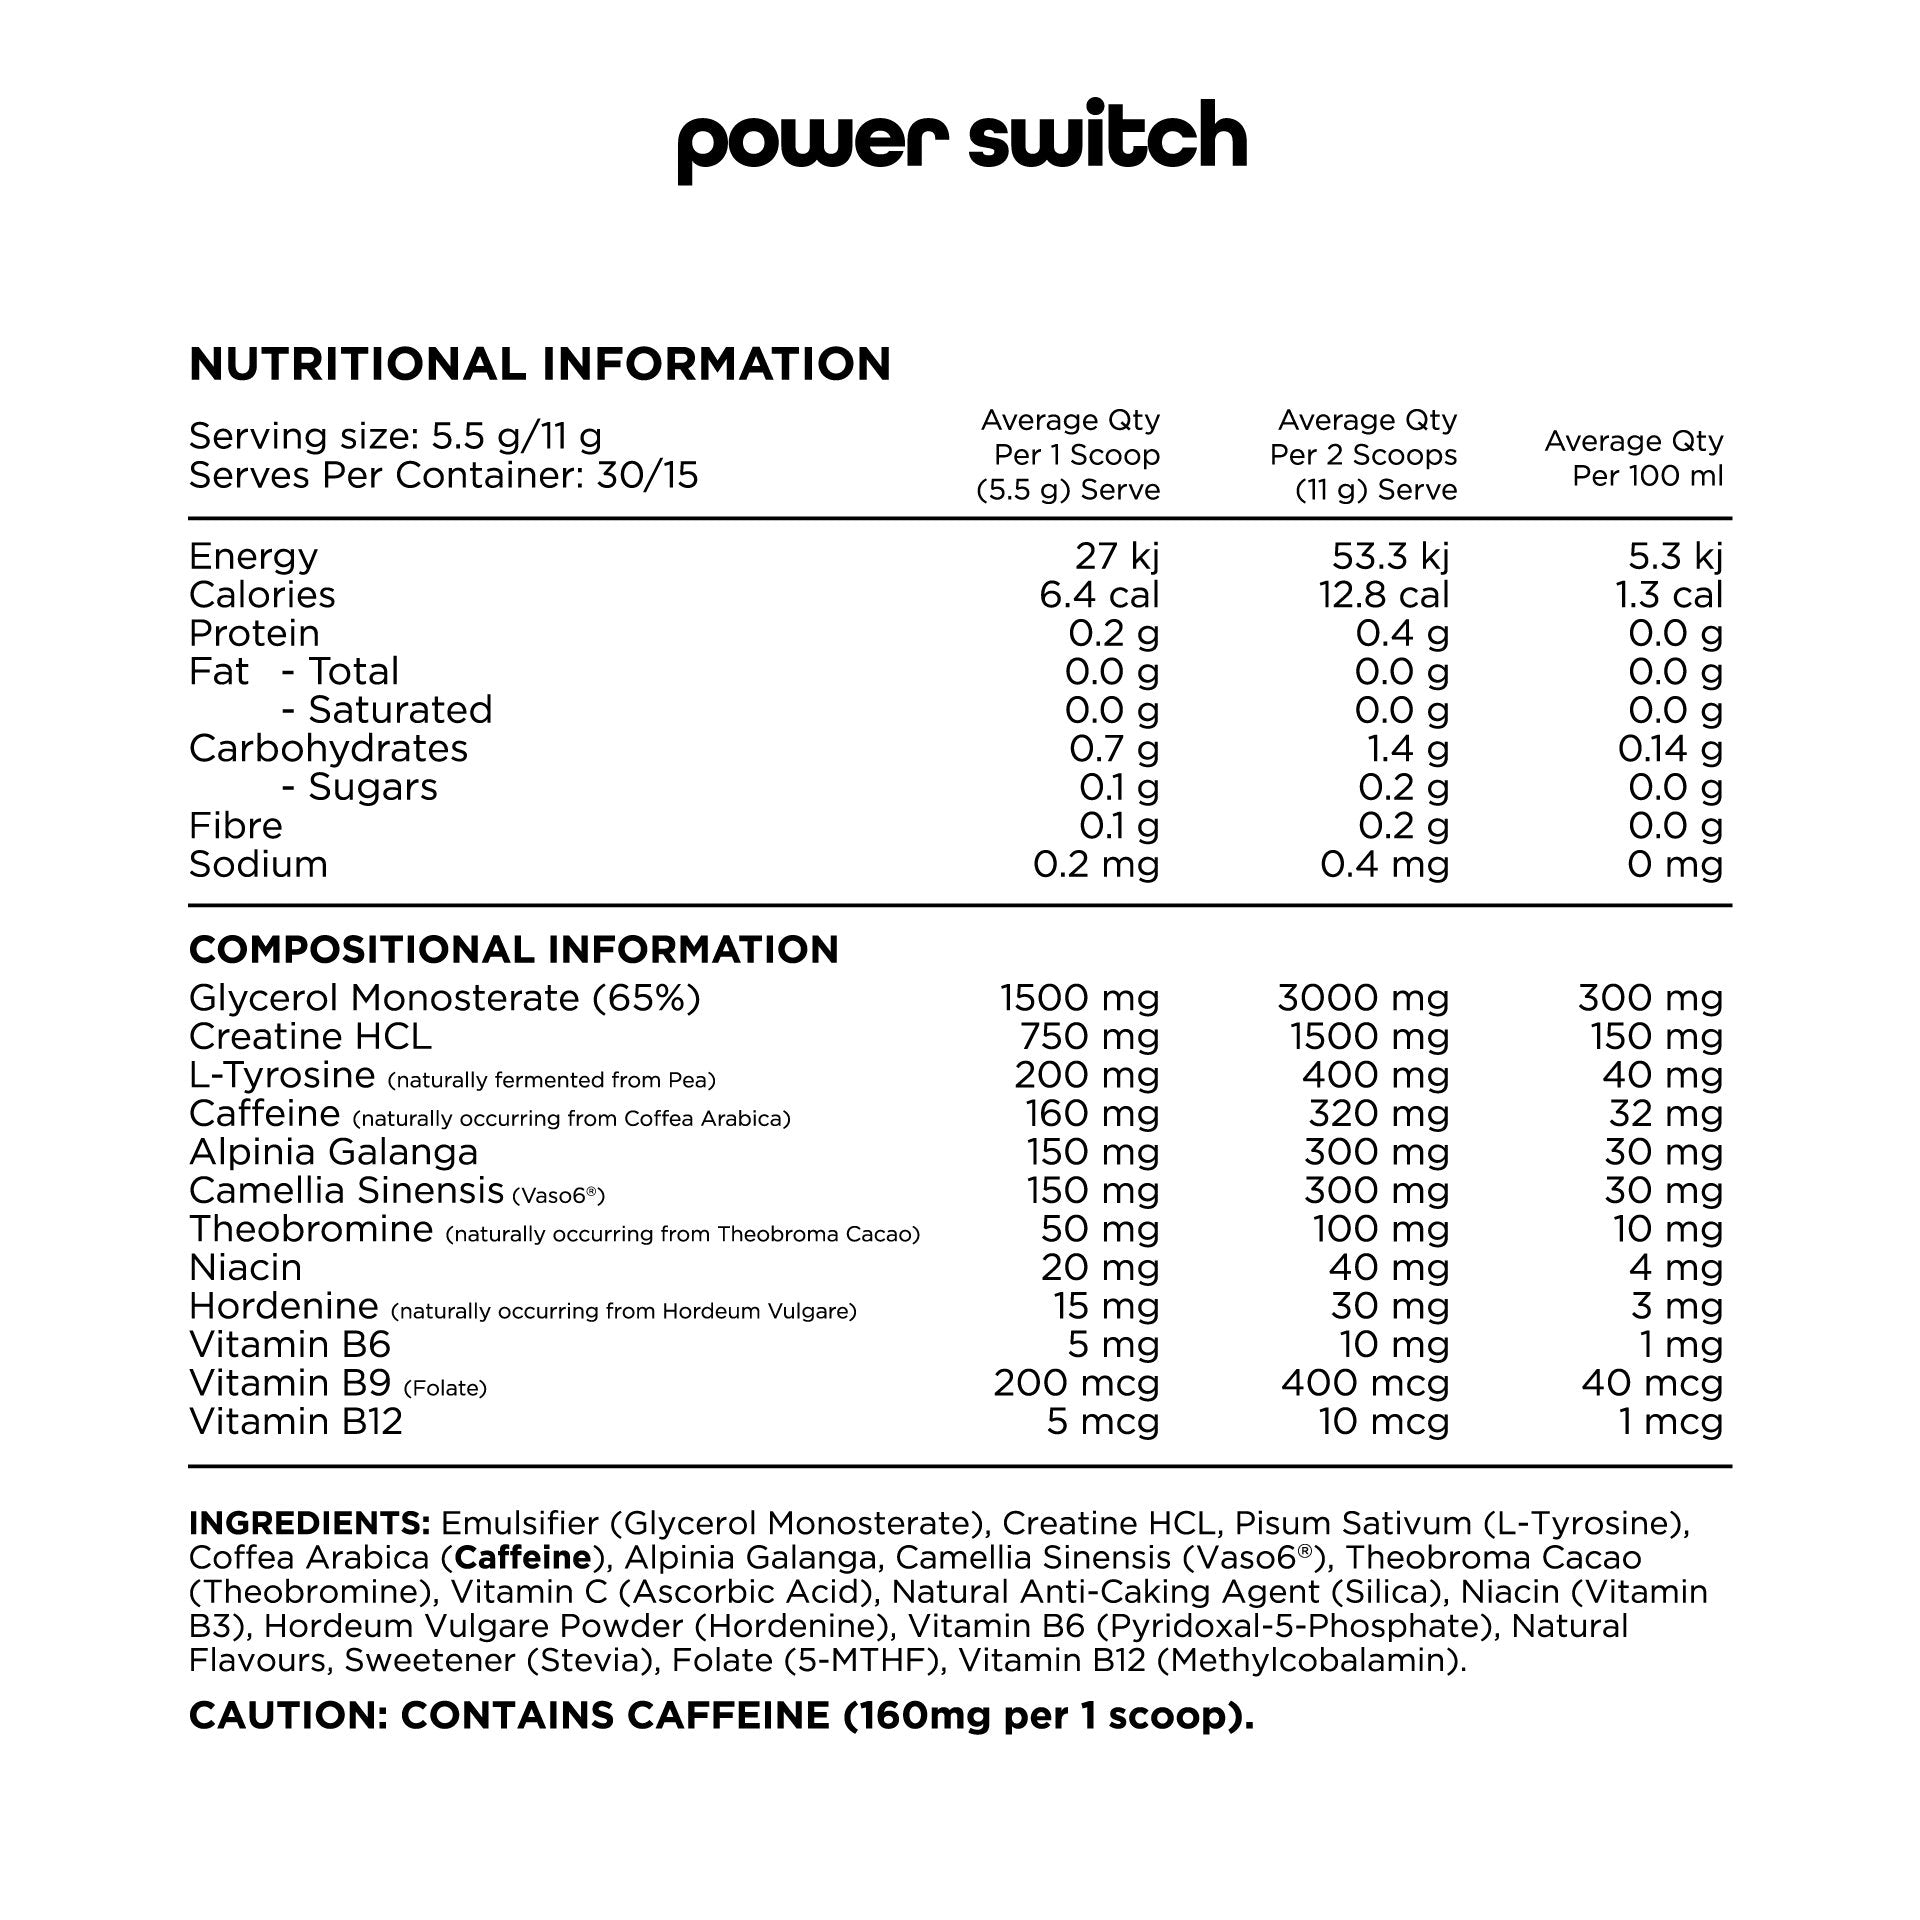 Switch Nutrition Power Performance Energy Blend Red Raspberry 165g